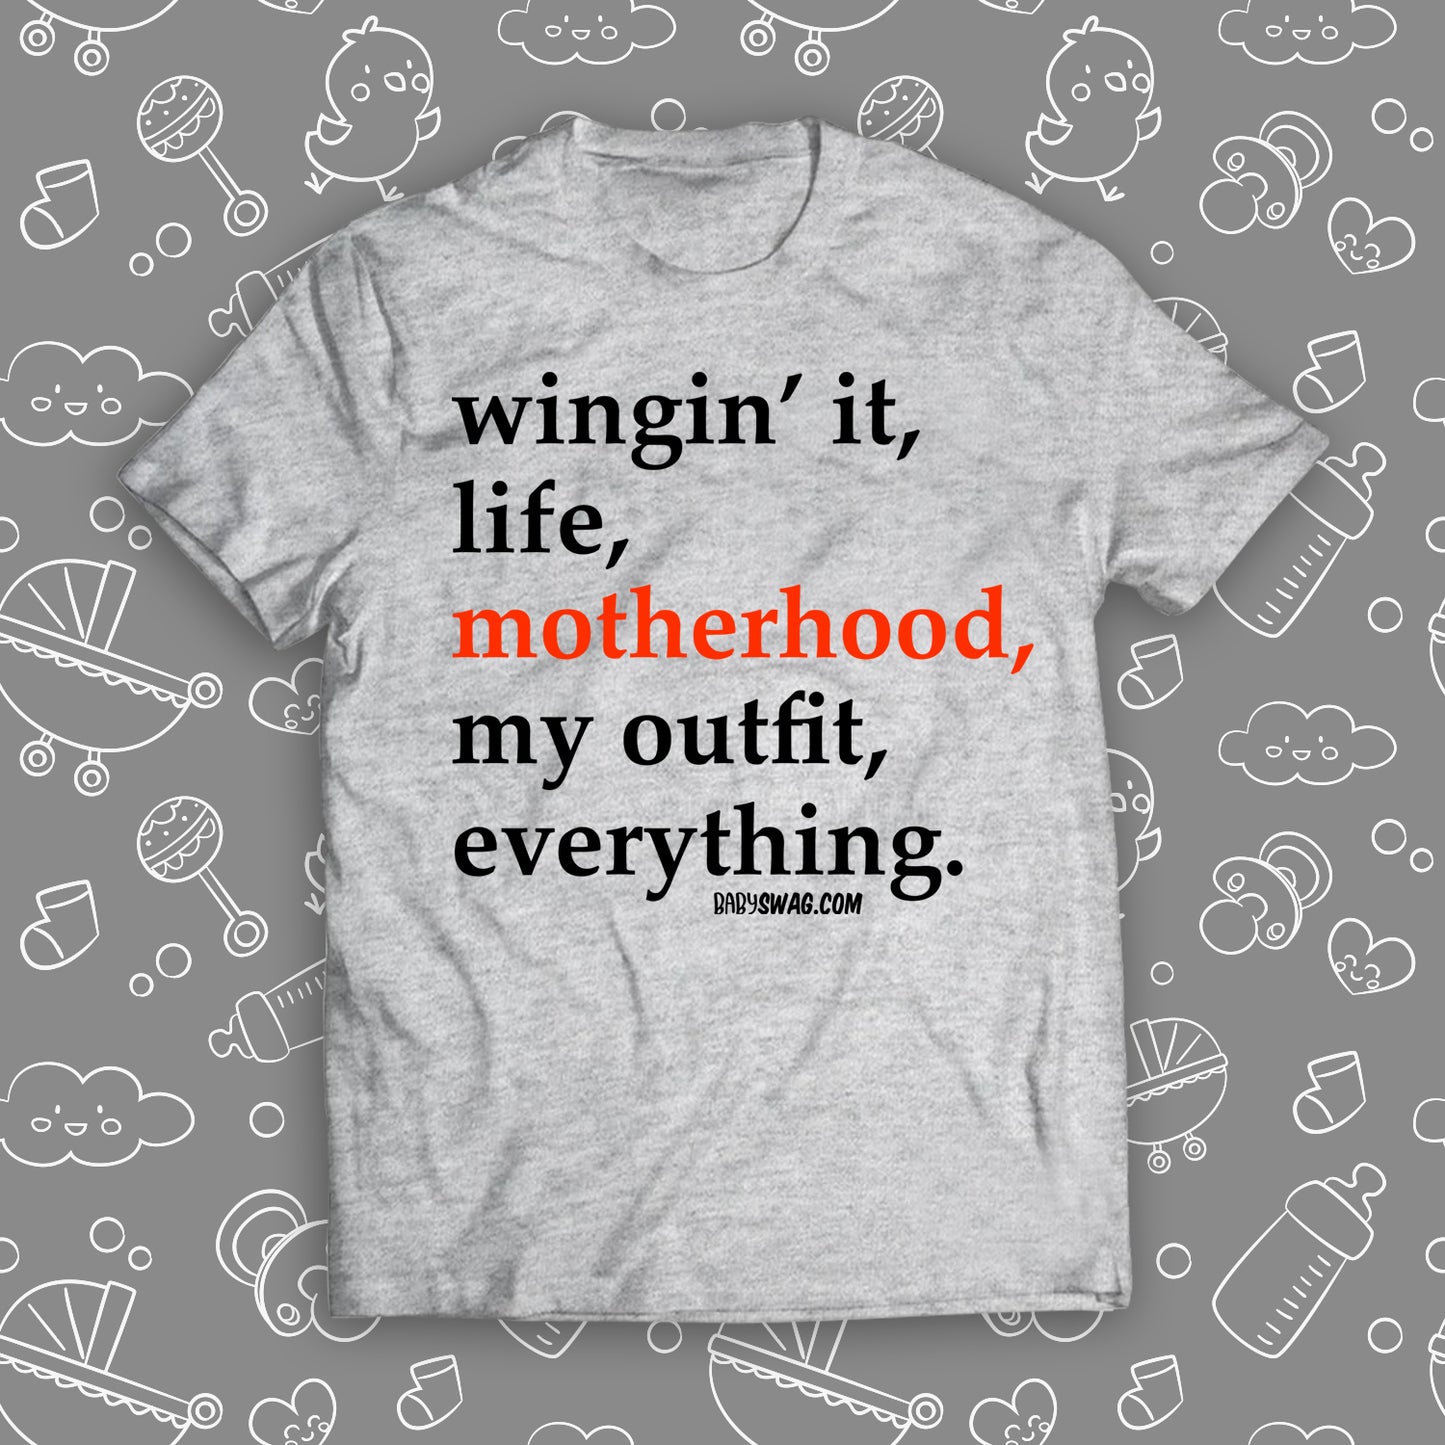 Wingin' It, Life, Motherhood, My Outfit, Everything